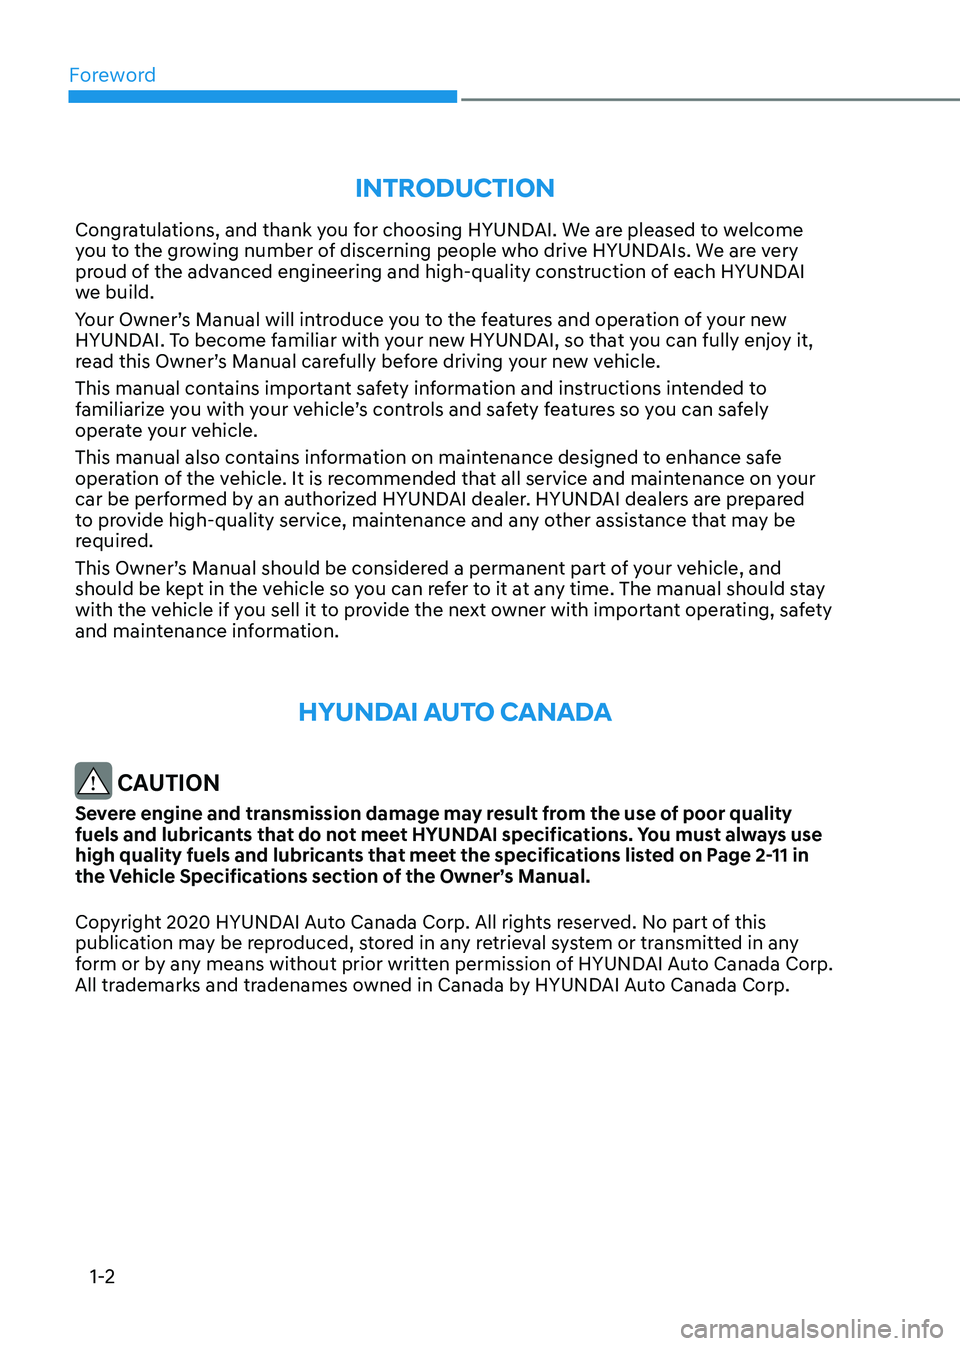 HYUNDAI ELANTRA HYBRID 2022  Owners Manual Foreword
1-2
IntroductIon
Congratulations, and thank you for choosing HYUNDAI. We are pleased to welcome  
you to the growing number of discerning people who drive HYUNDAIs. We are very 
proud of the 